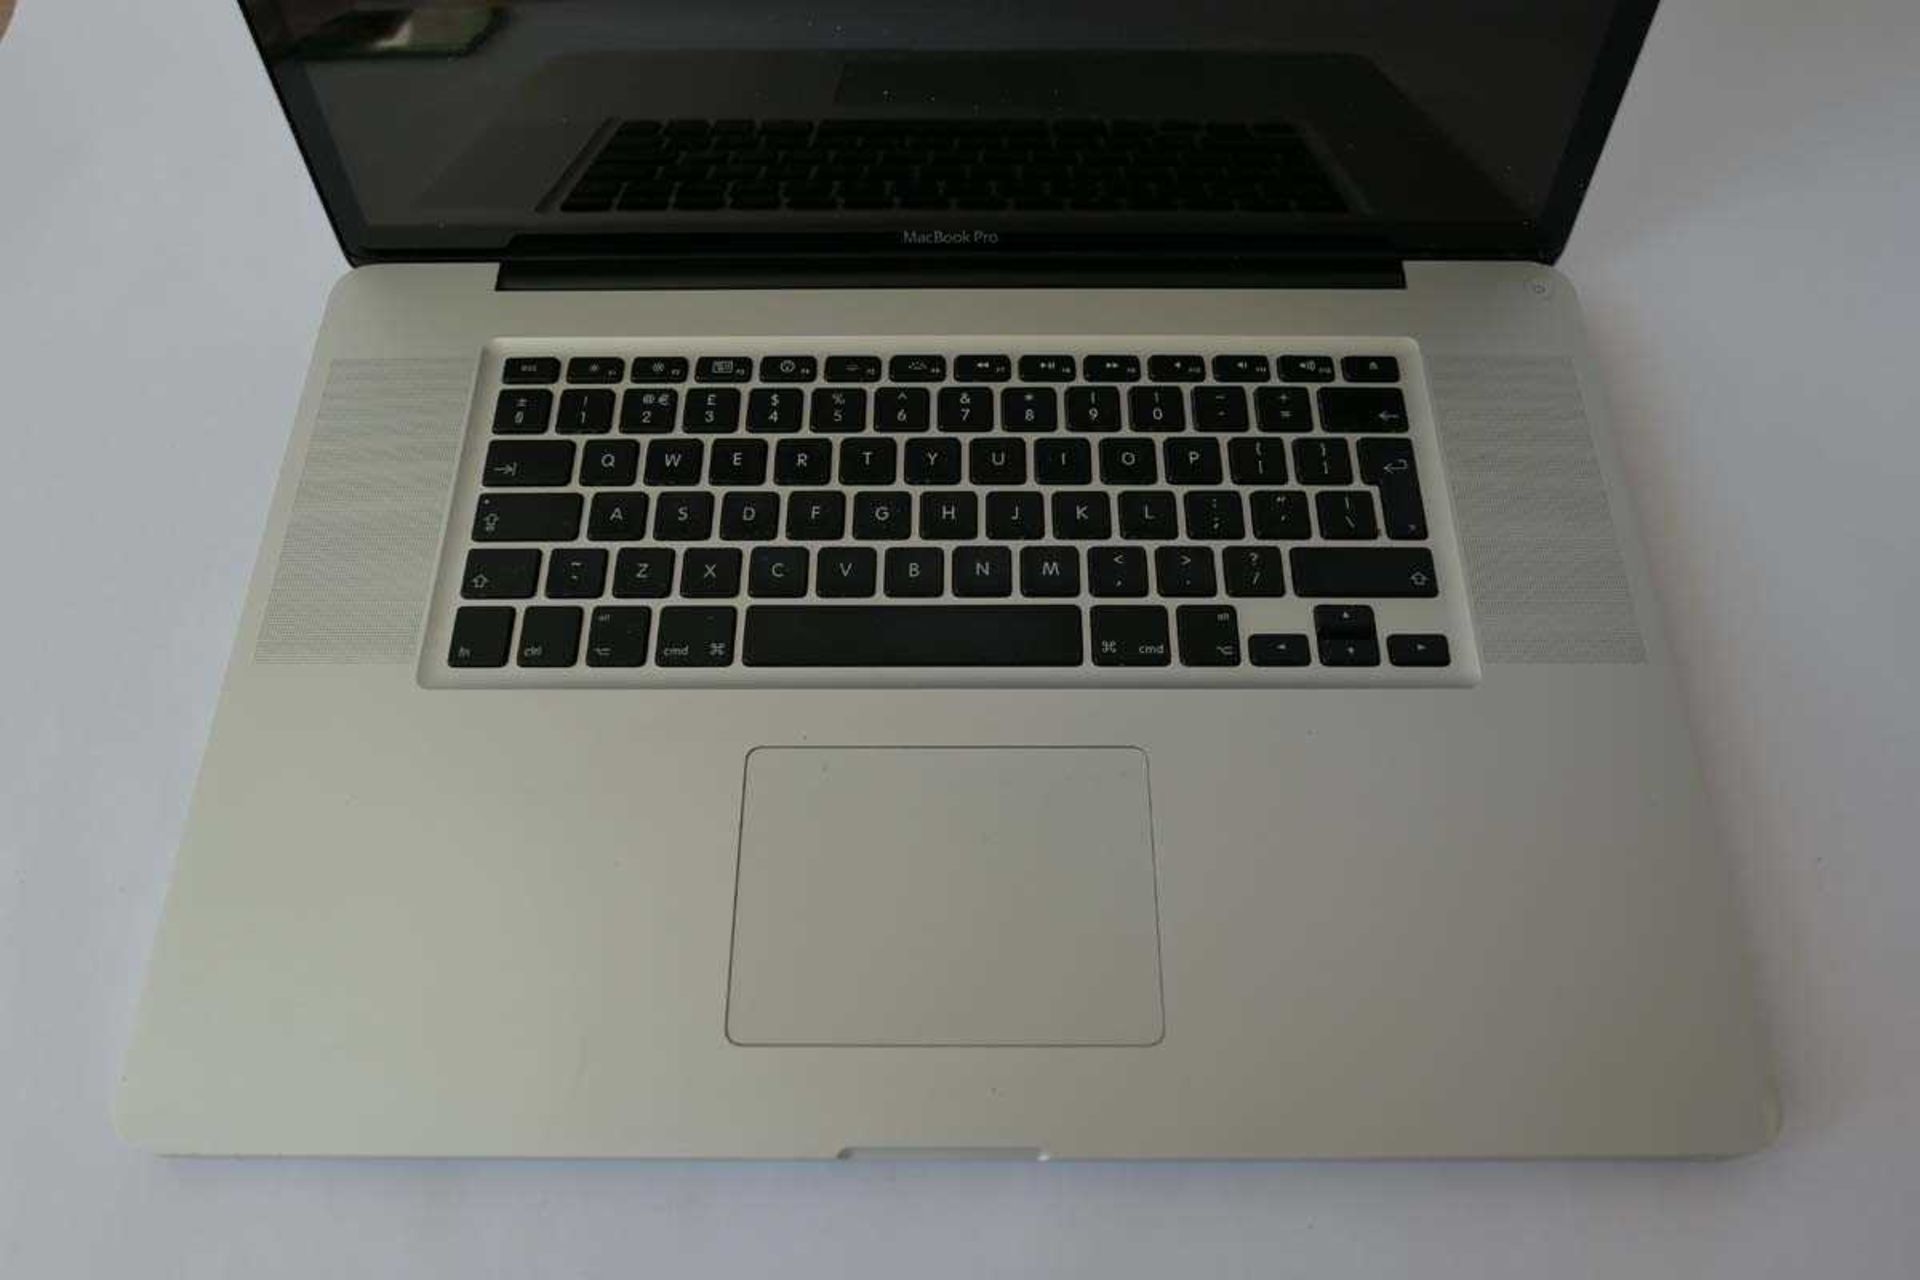 +VAT MacBook Pro 15" 2009 A1297 laptop (a/f no HDD, possible fluid damage, parts missing) - Image 2 of 2